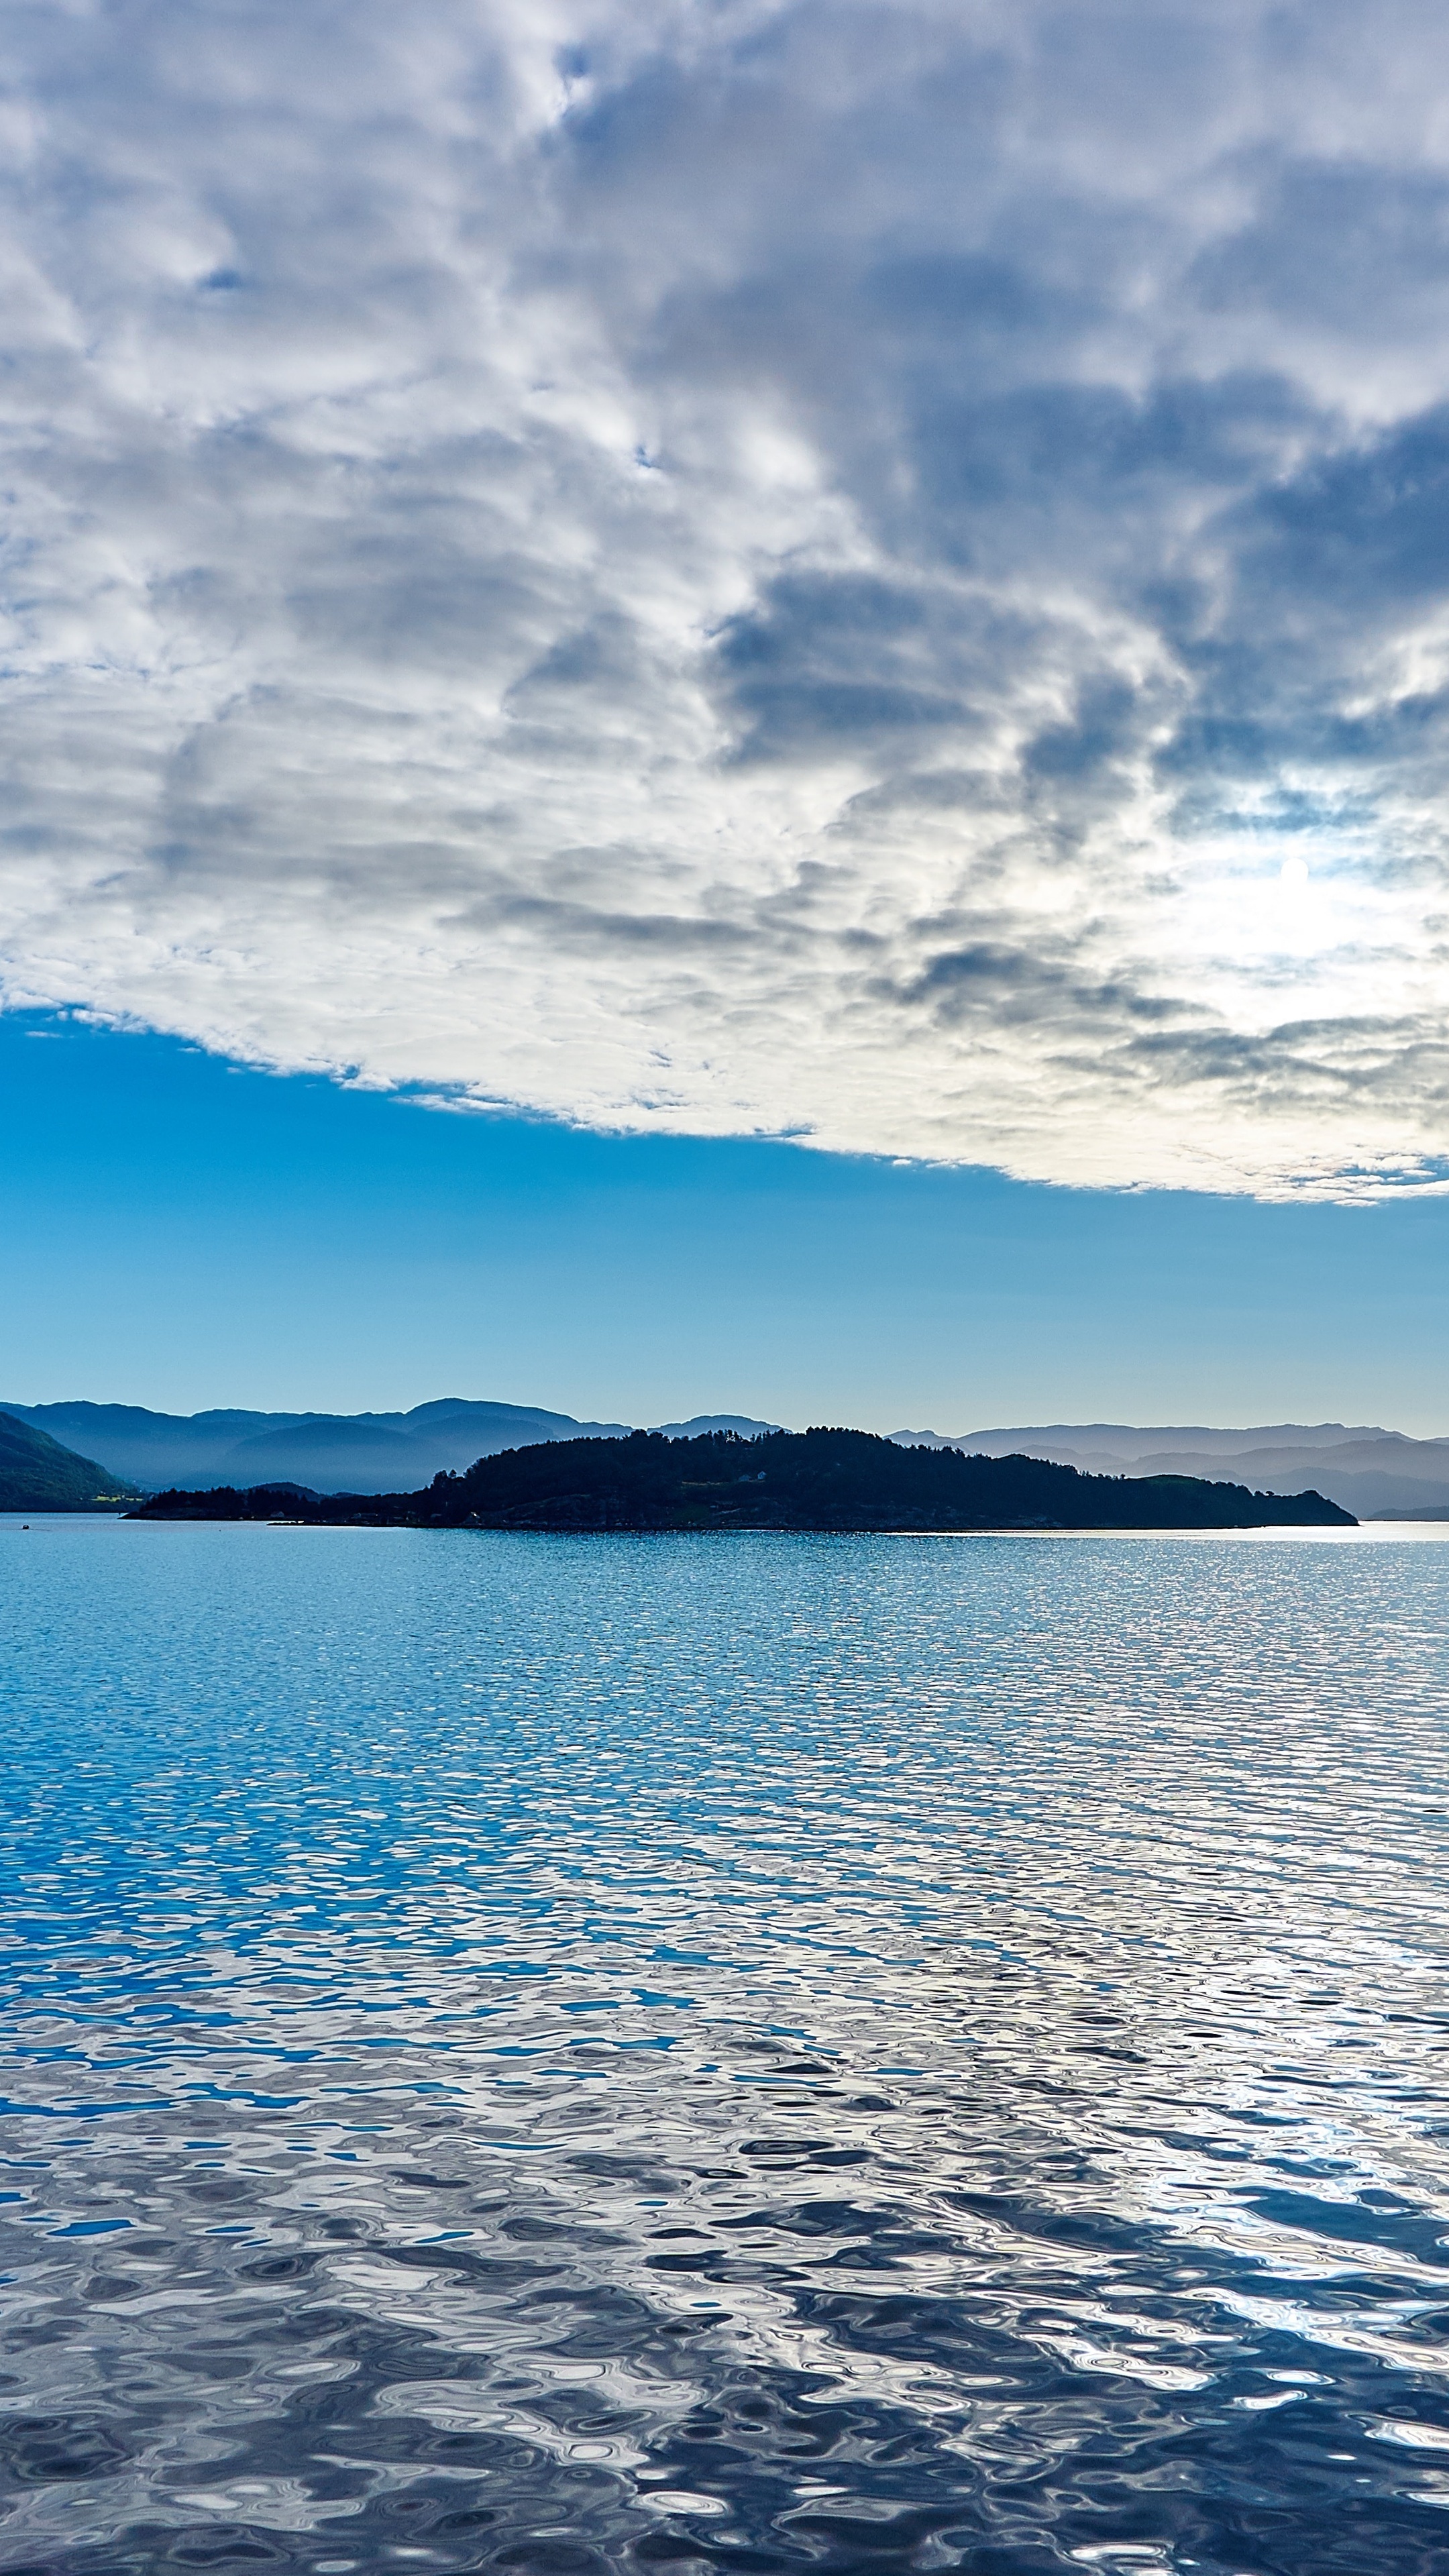 Seascape: Cloudy weather at the national park lake and a small island, Natural reserve. 2160x3840 4K Background.